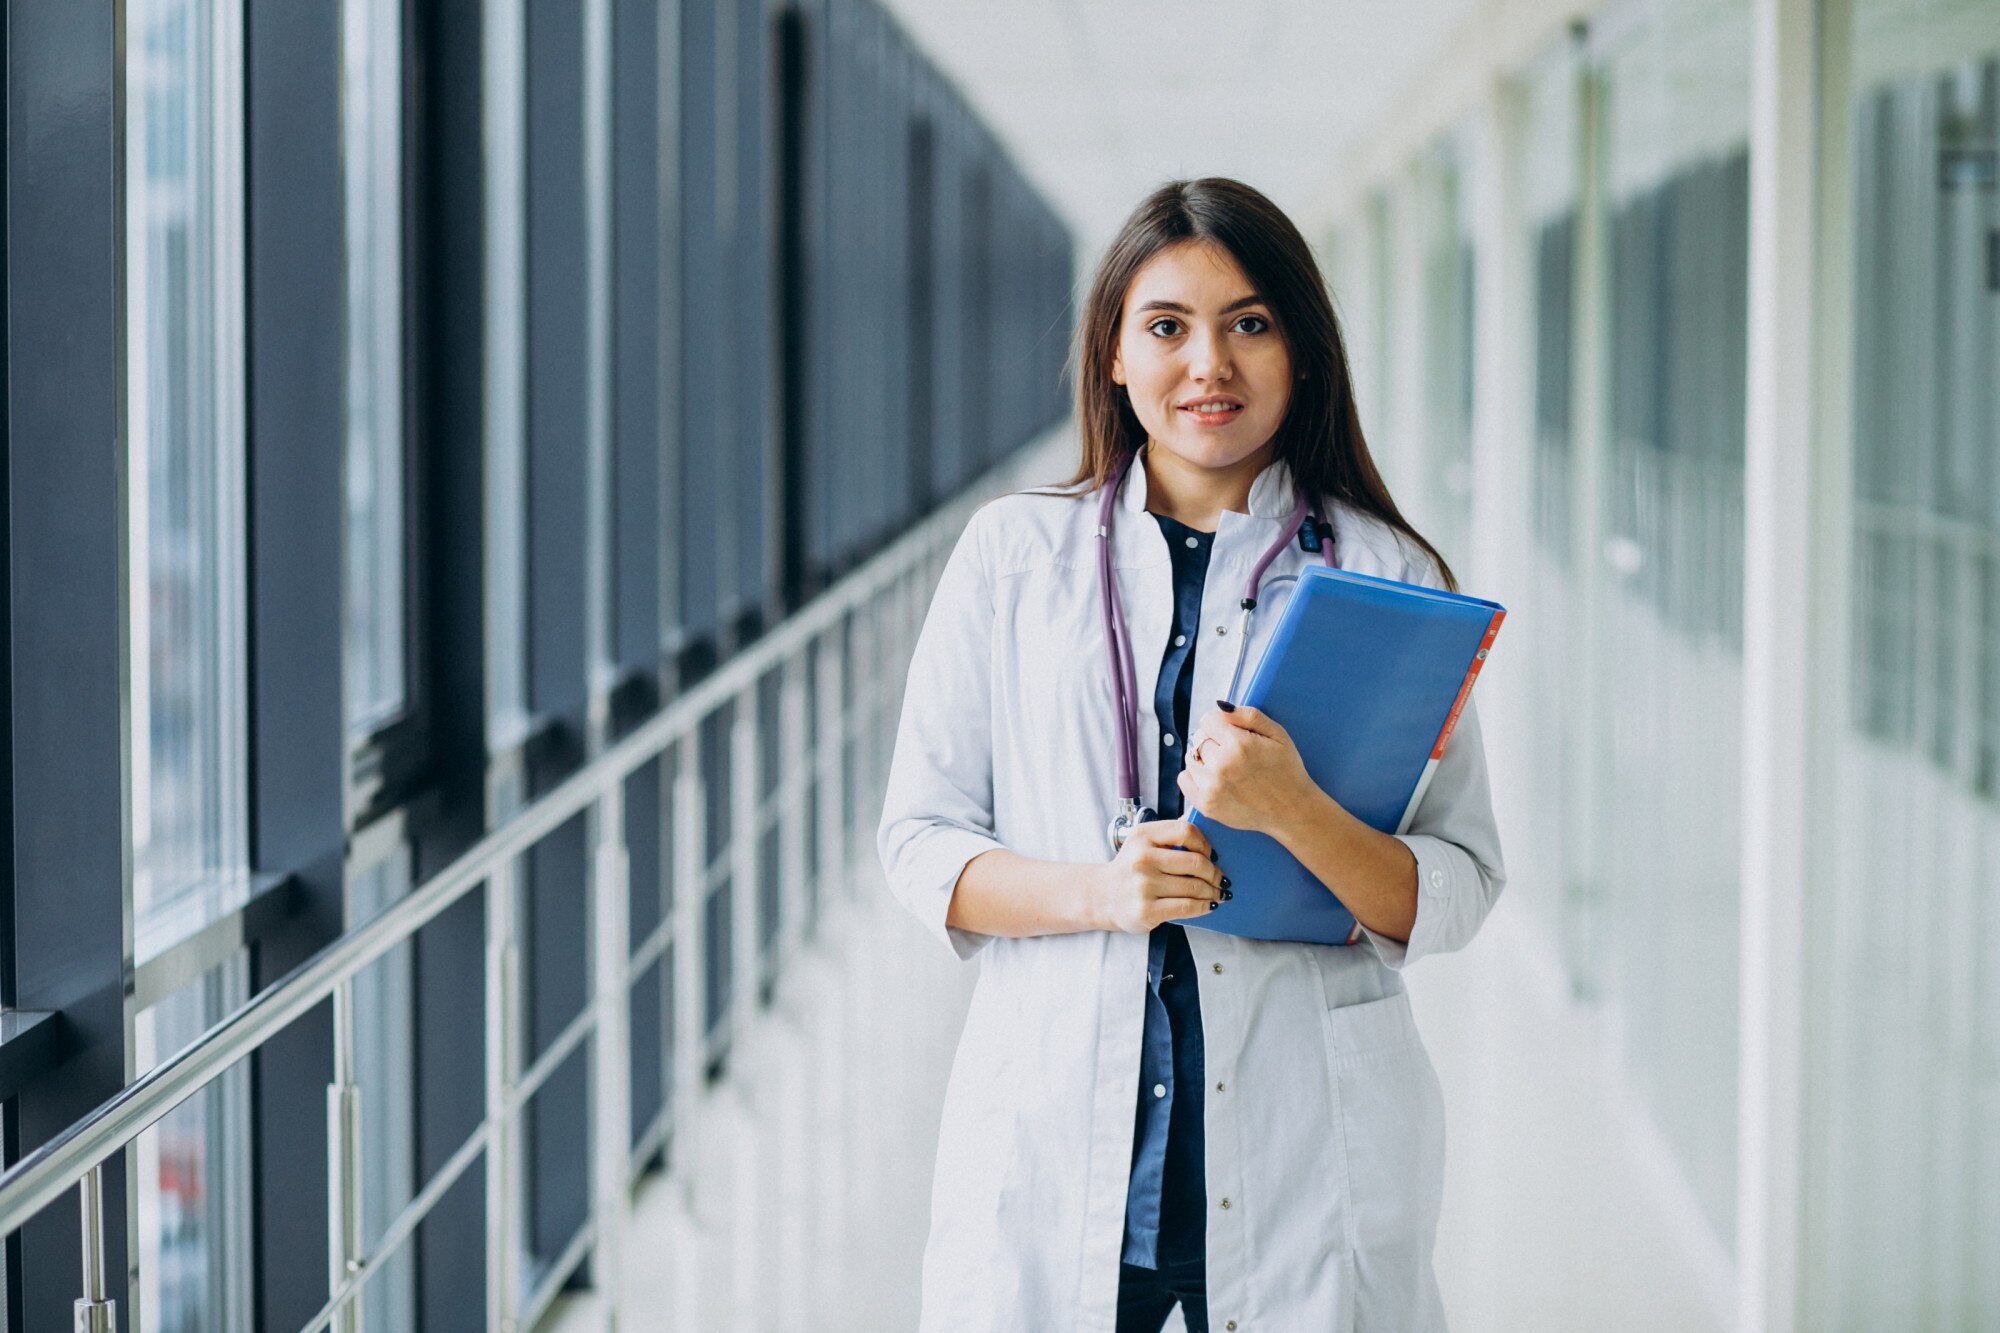 4 Steps to Hiring Top Medical Assistant Talent